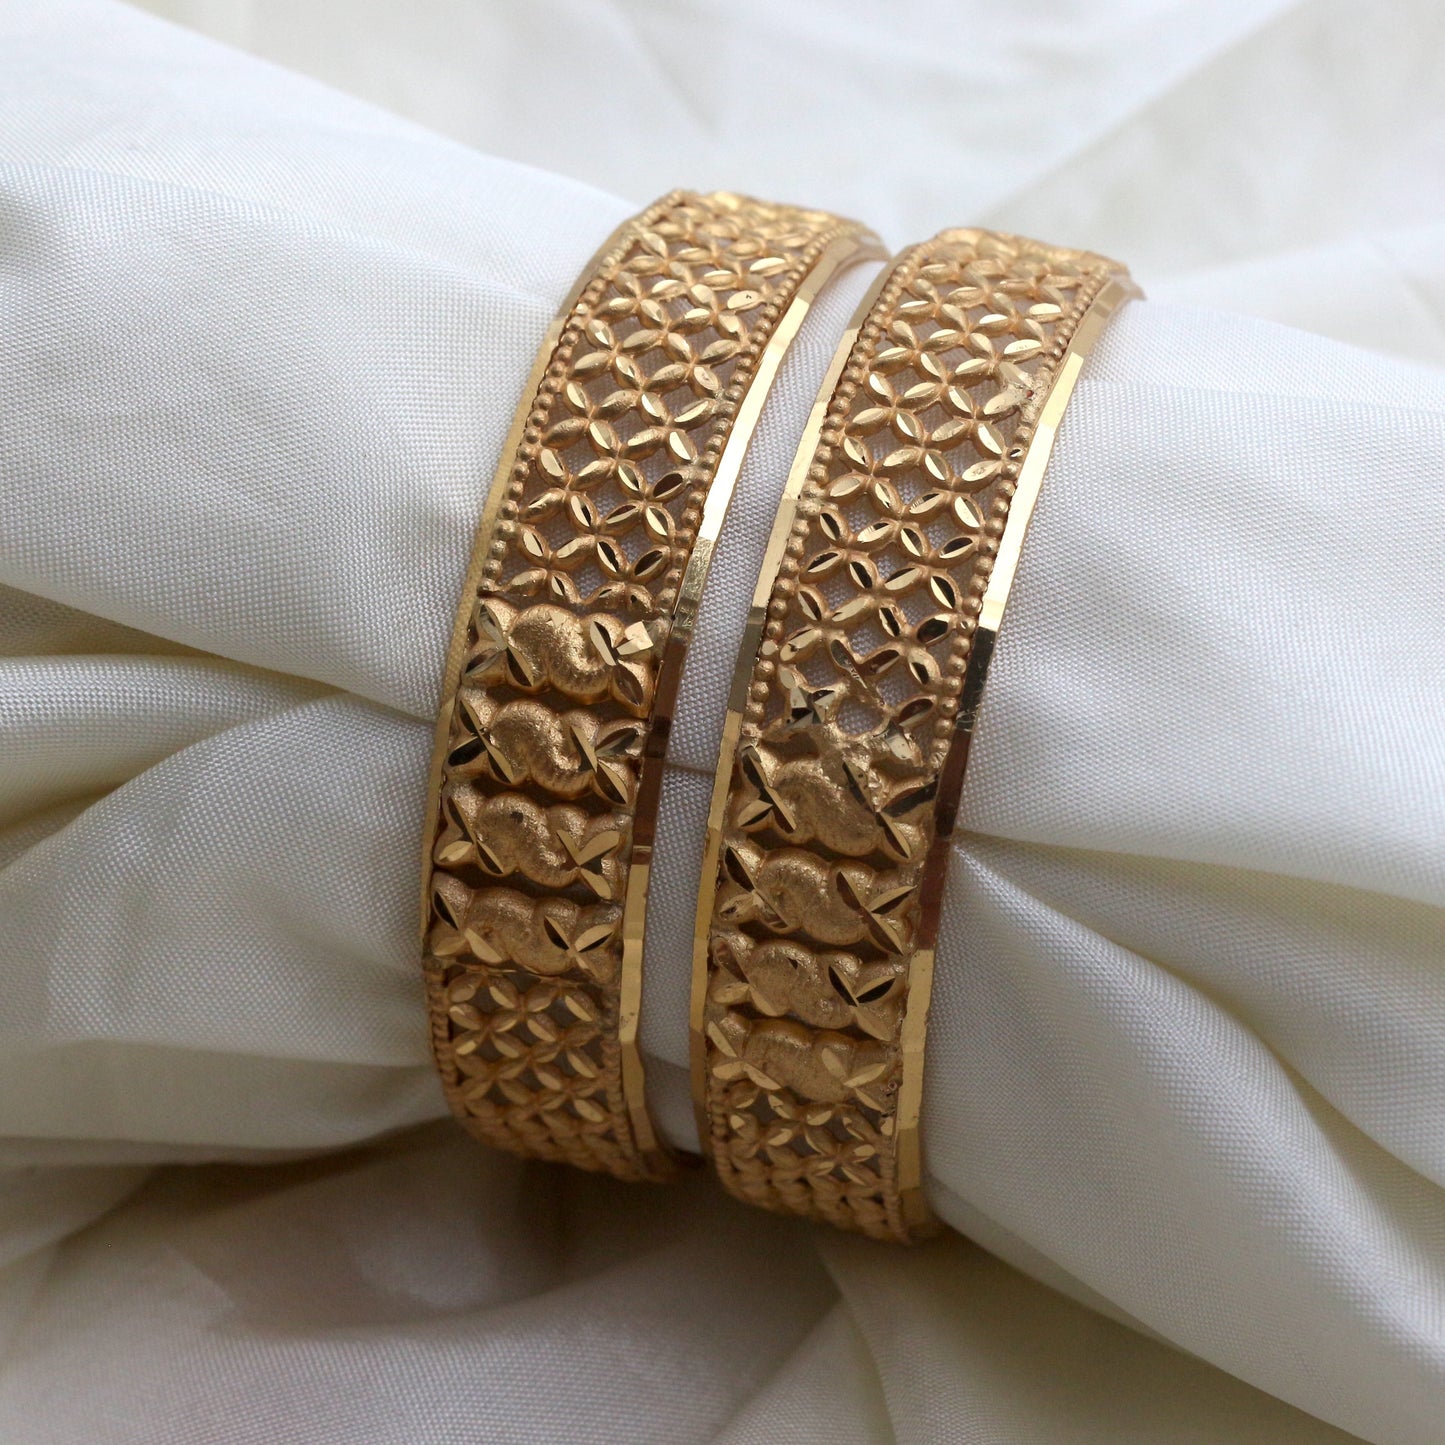 Real Gold Tone Thick Bangles - SS004 - Daily Wear/Office Wear/Function Wear Bangles